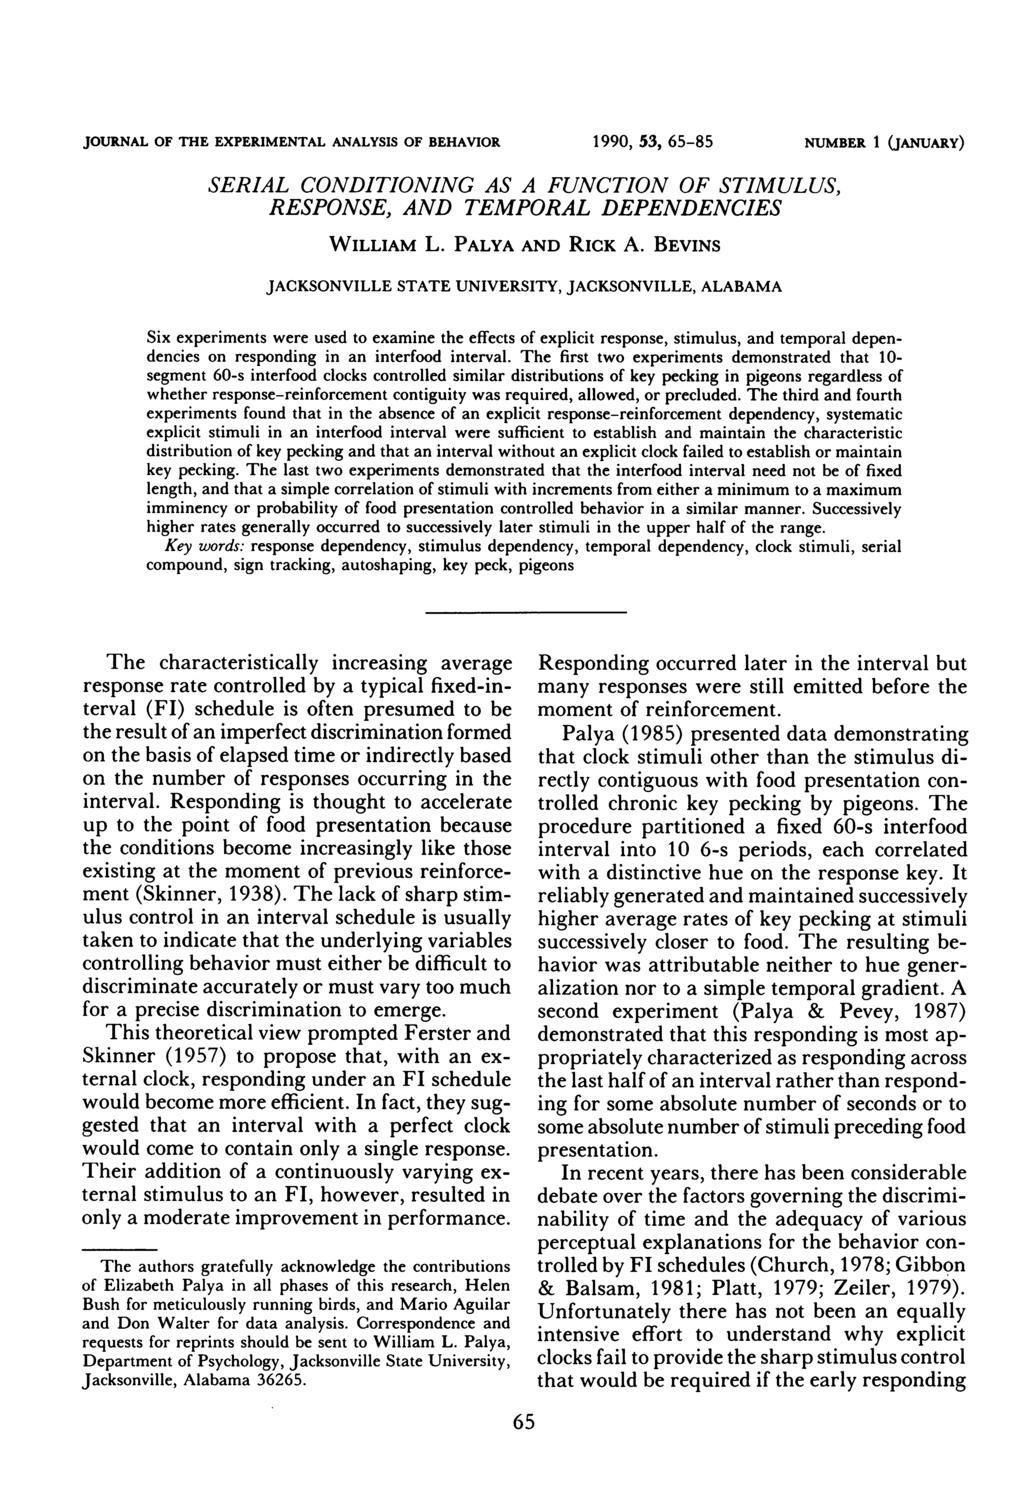 JOURNAL OF THE EXPERIMENTAL ANALYSIS OF BEHAVIOR 199, 53, 65-85 NUMBER 1 (JANUARY) SERIAL CONDITIONING AS A FUNCTION OF STIMULUS, RESPONSE, AND TEMPORAL DEPENDENCIES WILLIAM L. PALYA AND RICK A.